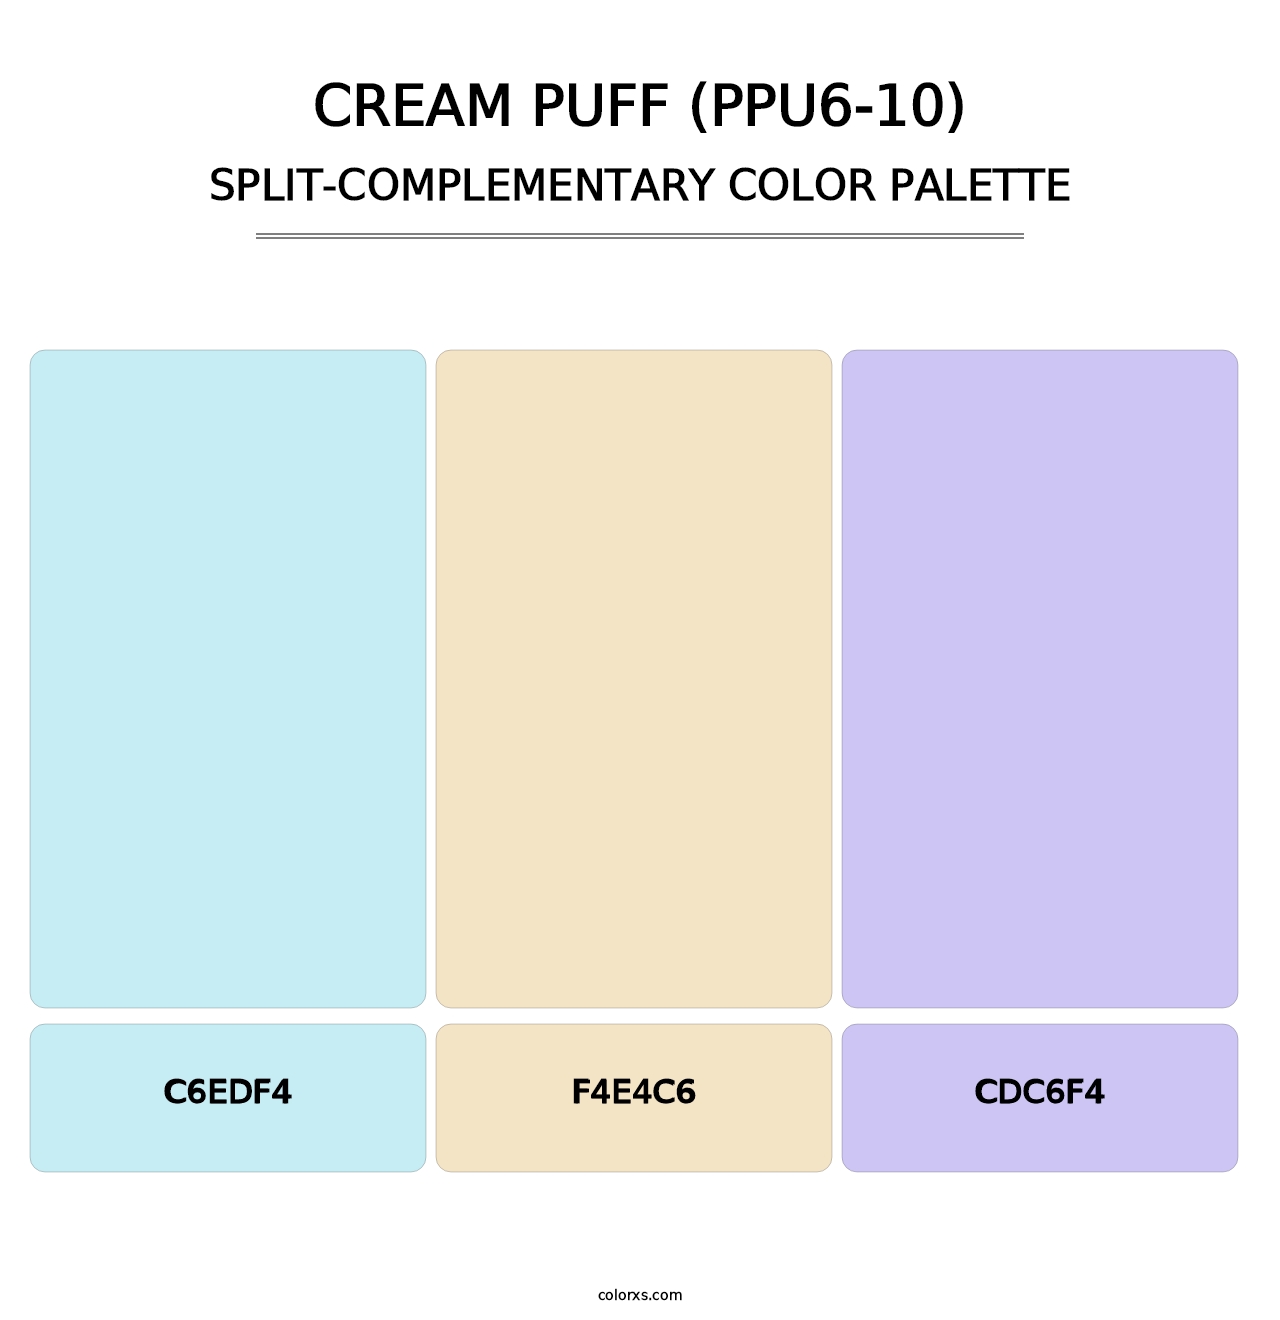 Cream Puff (PPU6-10) - Split-Complementary Color Palette